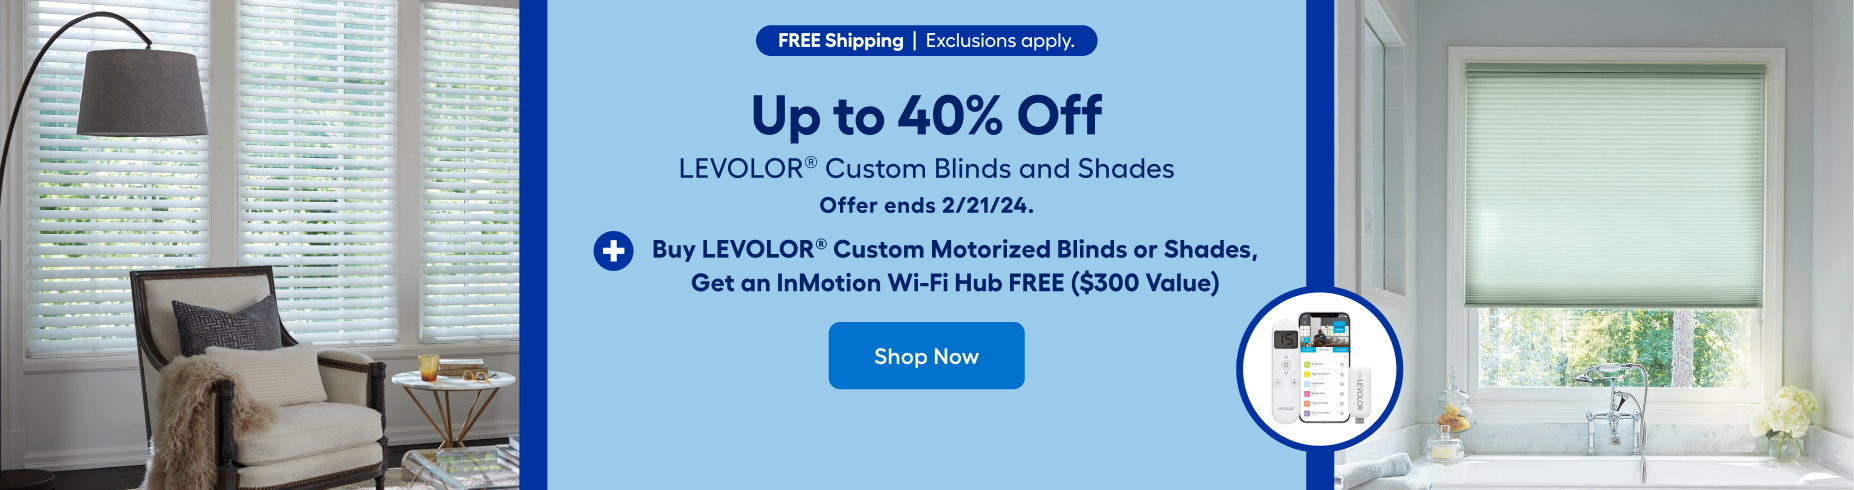 Levolor Motorized Blinds Troubleshooting: Fix Power Issues Now!